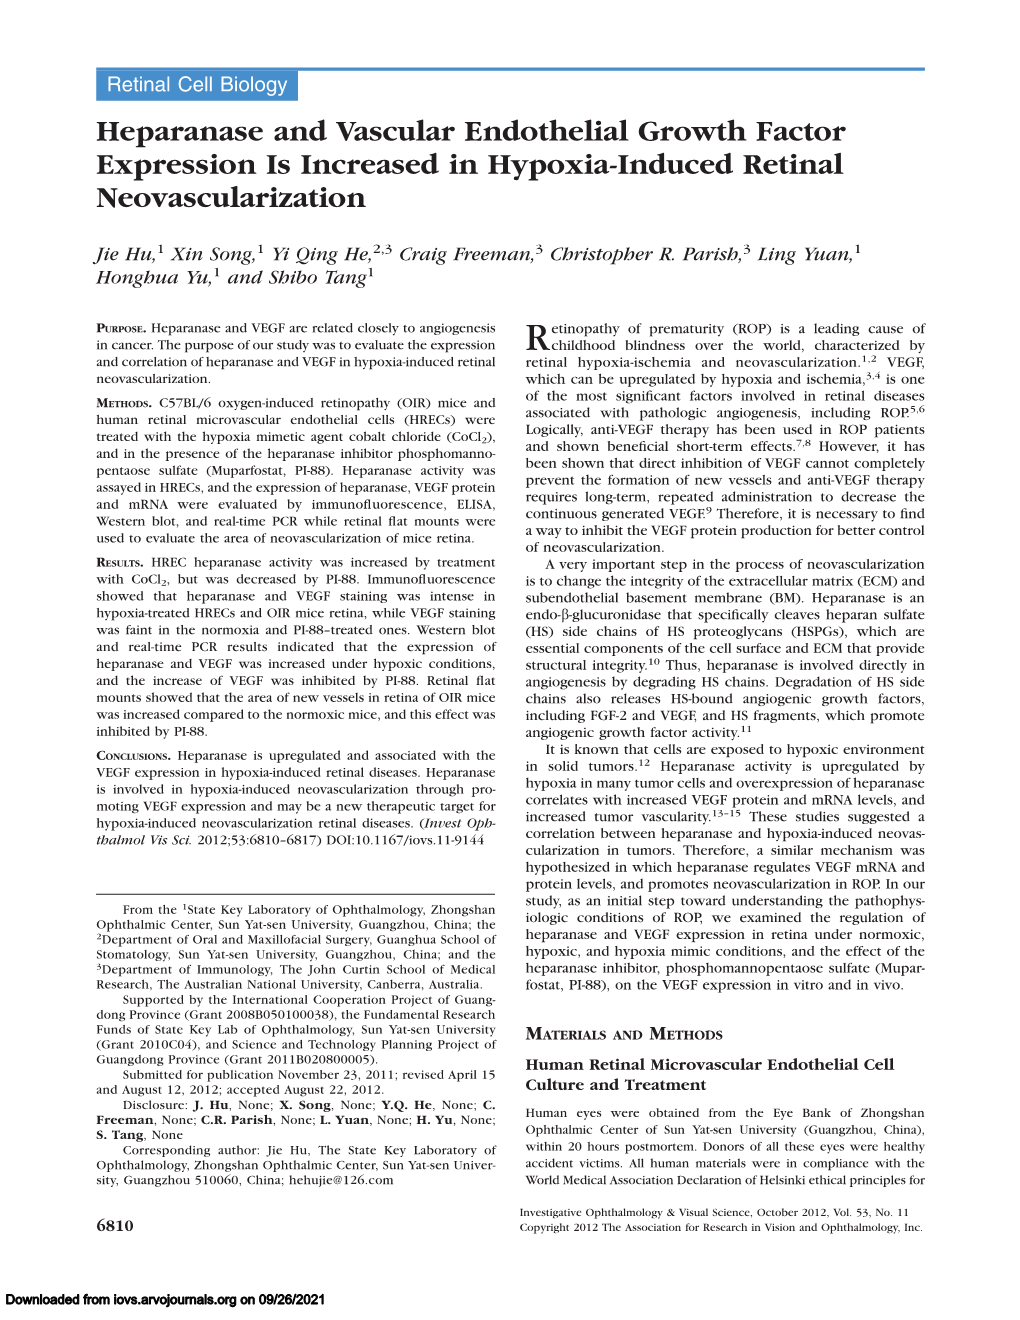 Heparanase and Vascular Endothelial Growth Factor Expression Is Increased in Hypoxia-Induced Retinal Neovascularization